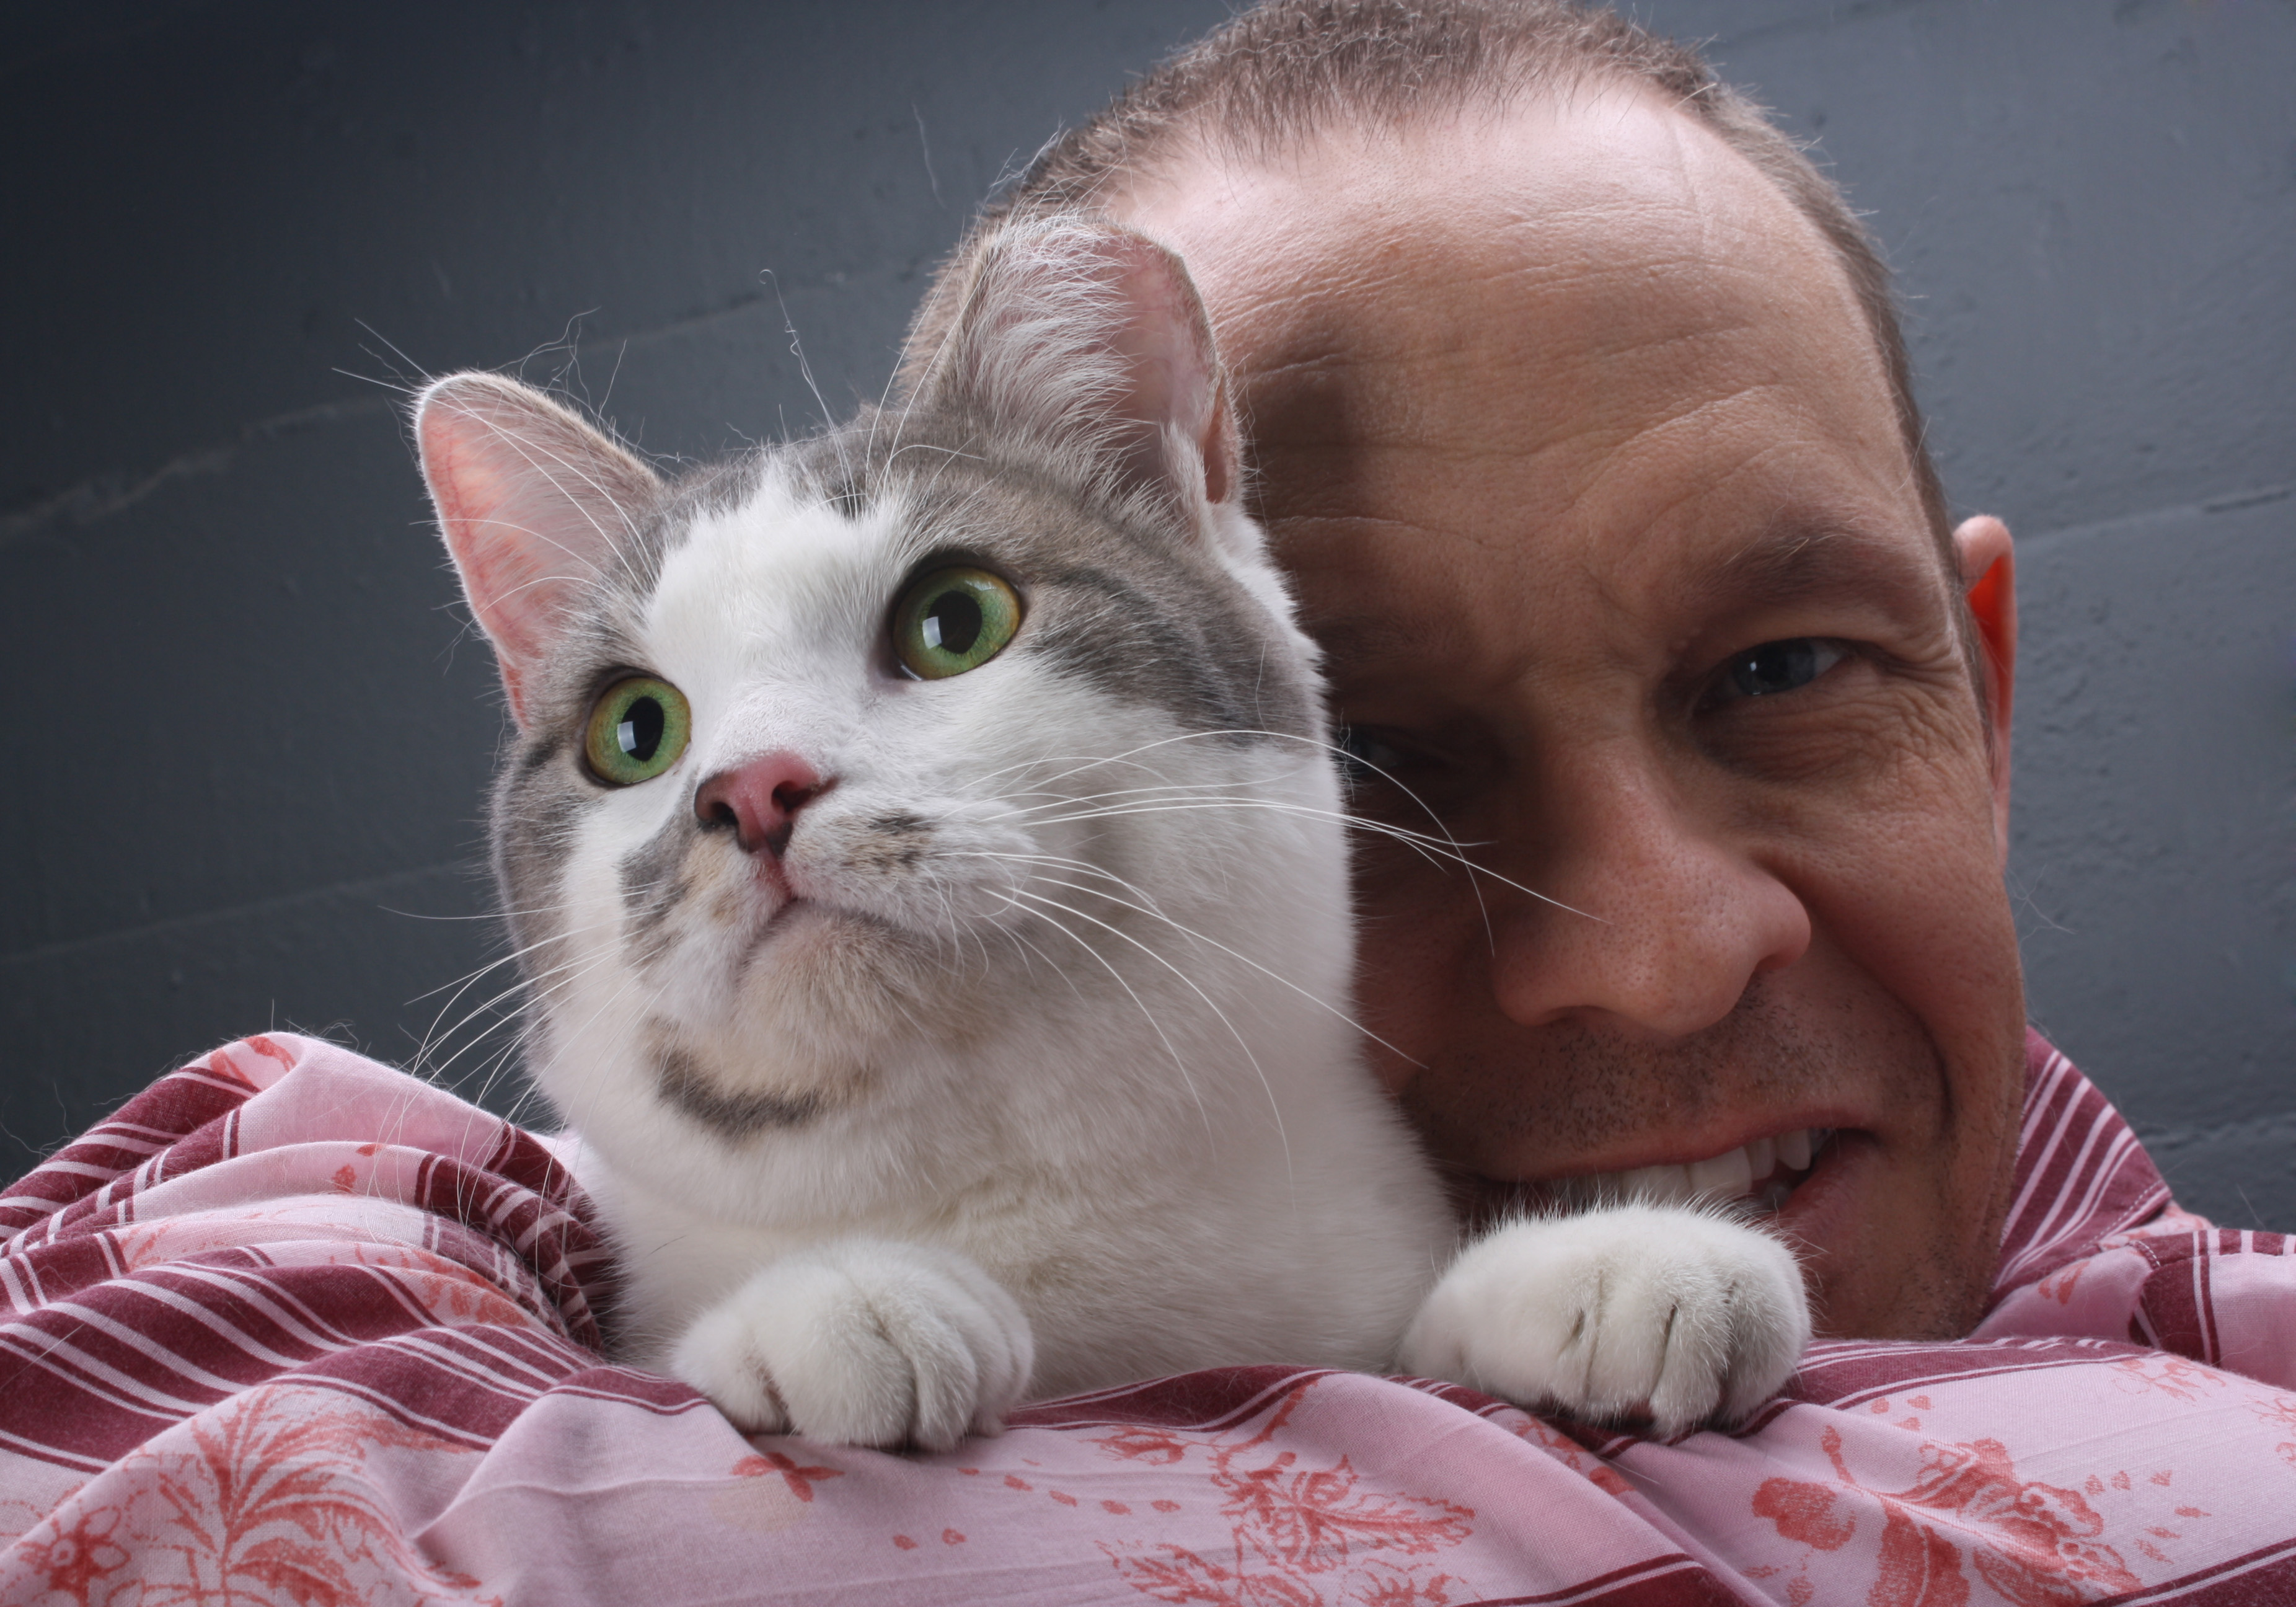 Bio shot of Peter J. Wolf, smiling and hugging a gray and white cat